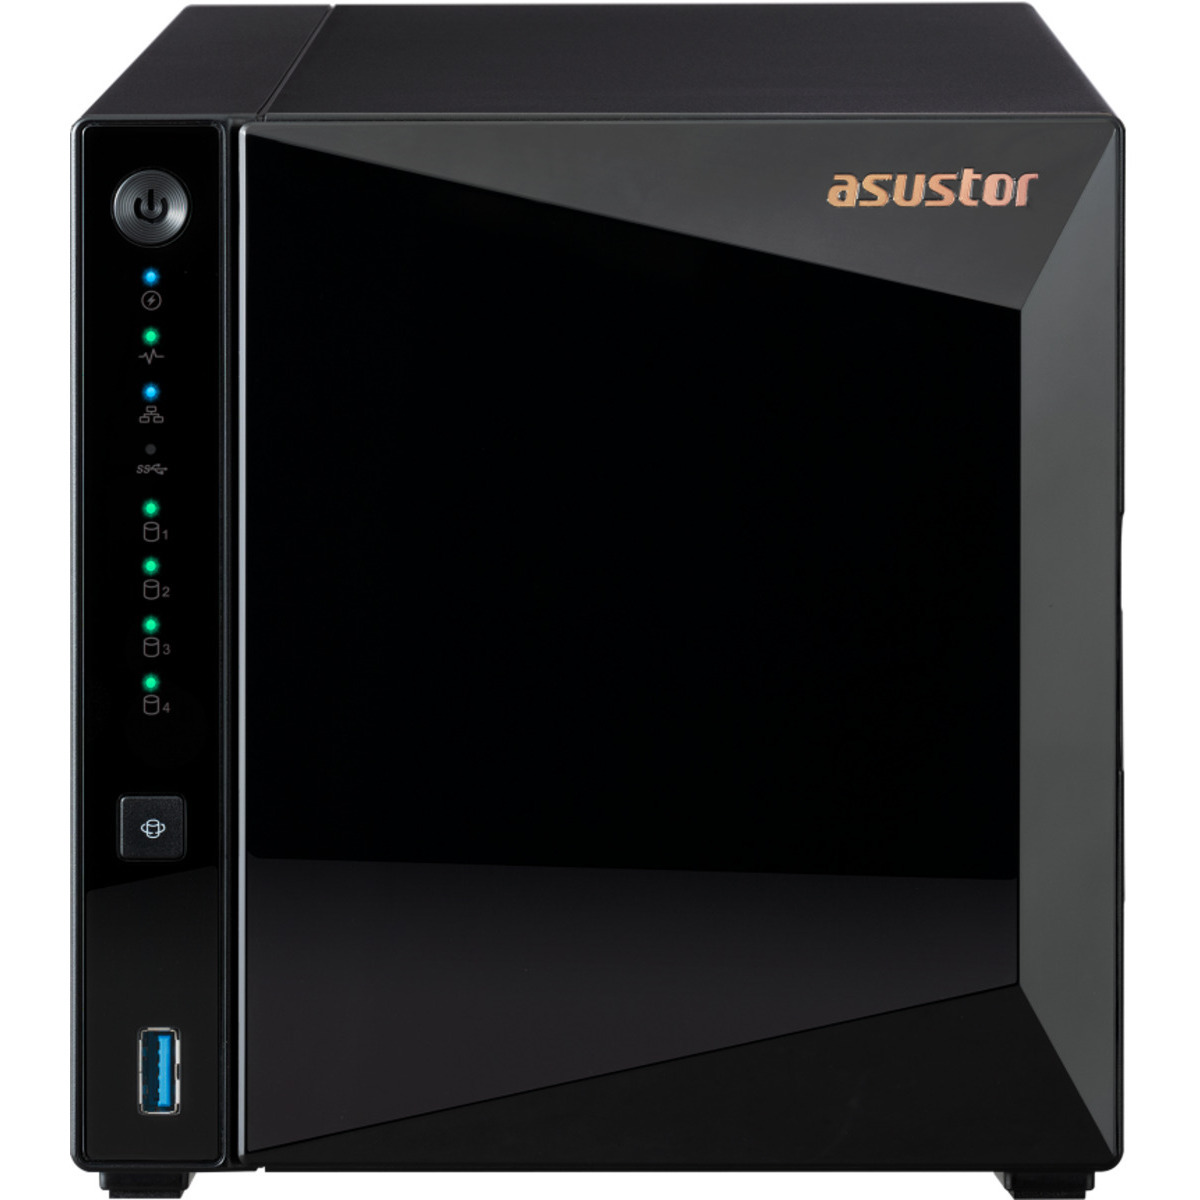 ASUSTOR DRIVESTOR 4 Pro AS3304T 66tb 4-Bay Desktop Personal / Basic Home / Small Office NAS - Network Attached Storage Device 3x22tb Toshiba Enterprise Capacity MG10AFA22TE 3.5 7200rpm SATA 6Gb/s HDD ENTERPRISE Class Drives Installed - Burn-In Tested DRIVESTOR 4 Pro AS3304T